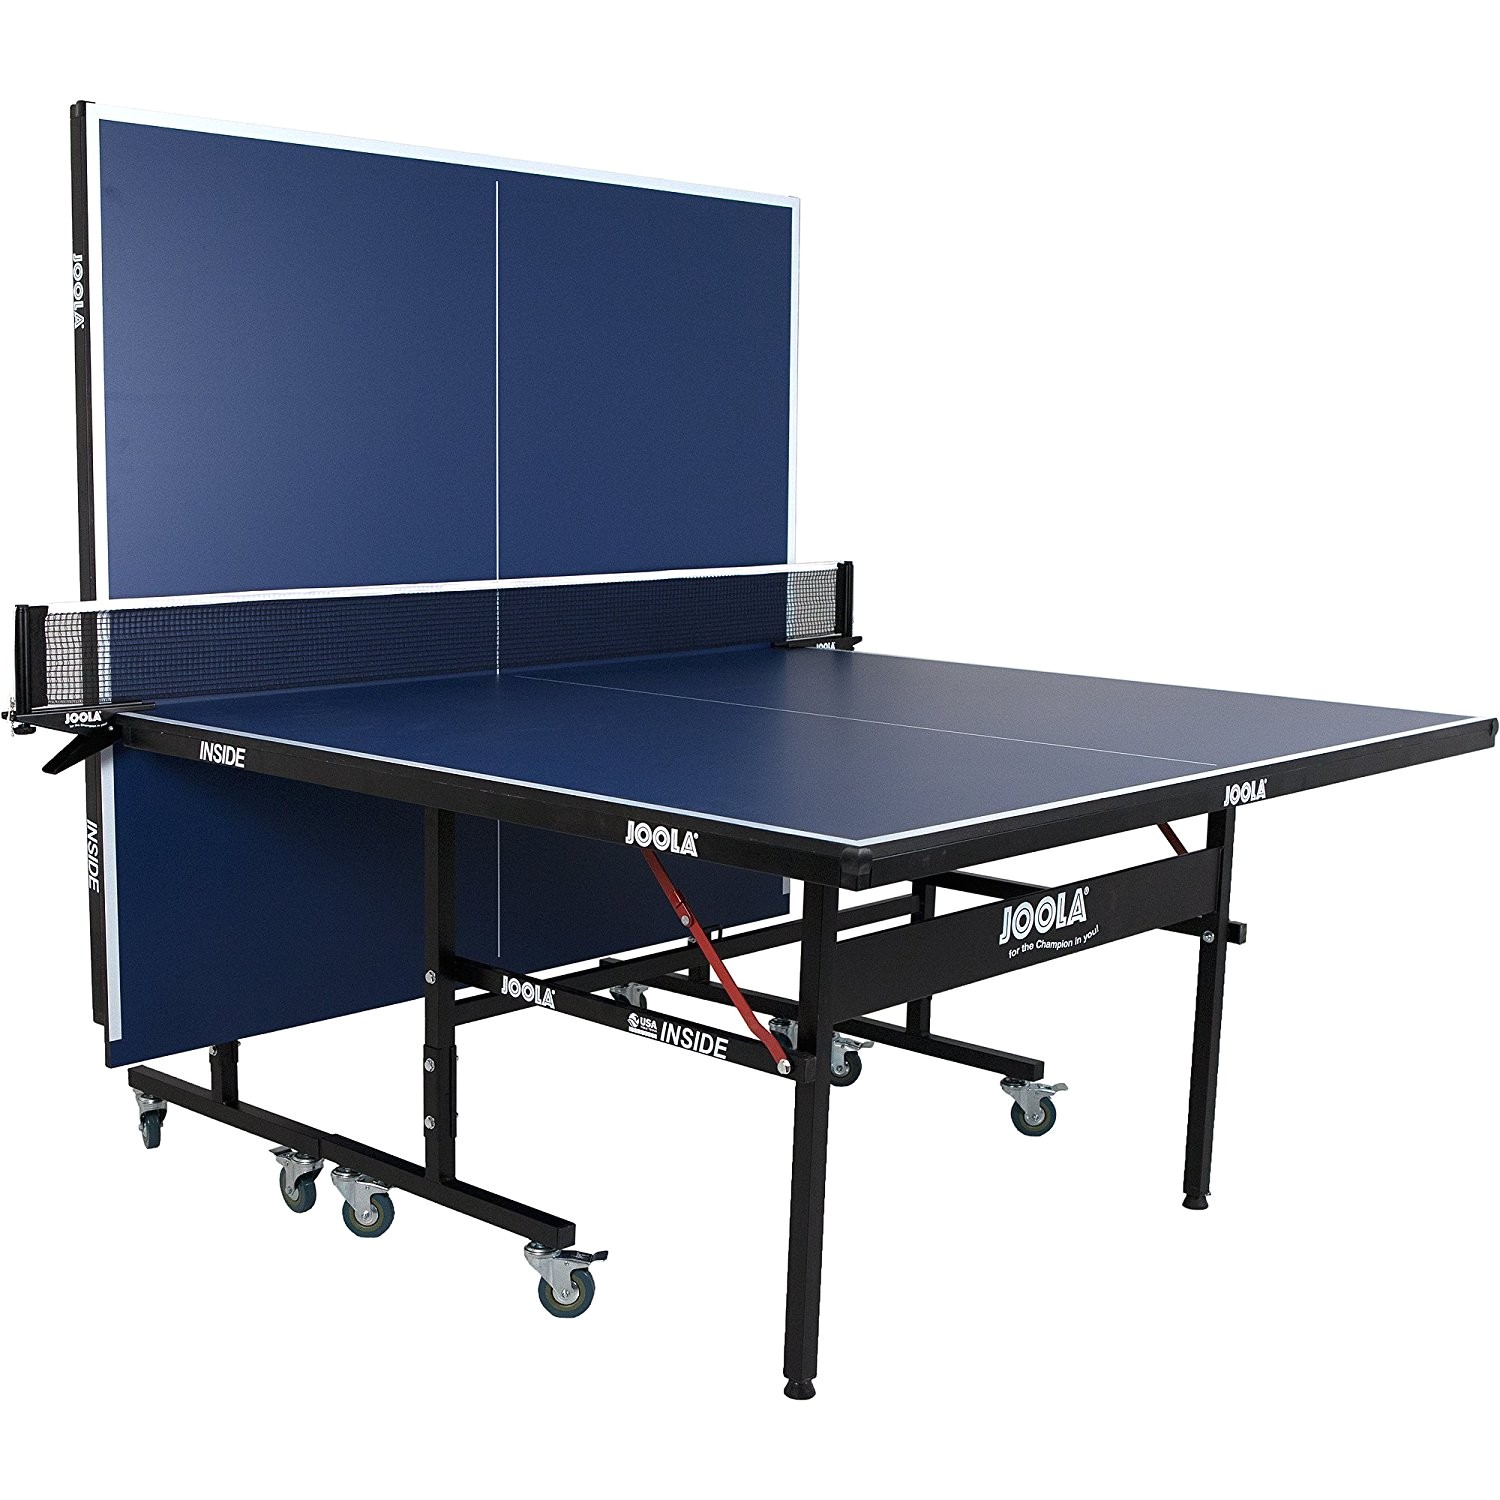 Joola Indoor Outdoor Ping Pong Table Joola Inside 15 Table Tennis Table Best Outdoor Ping